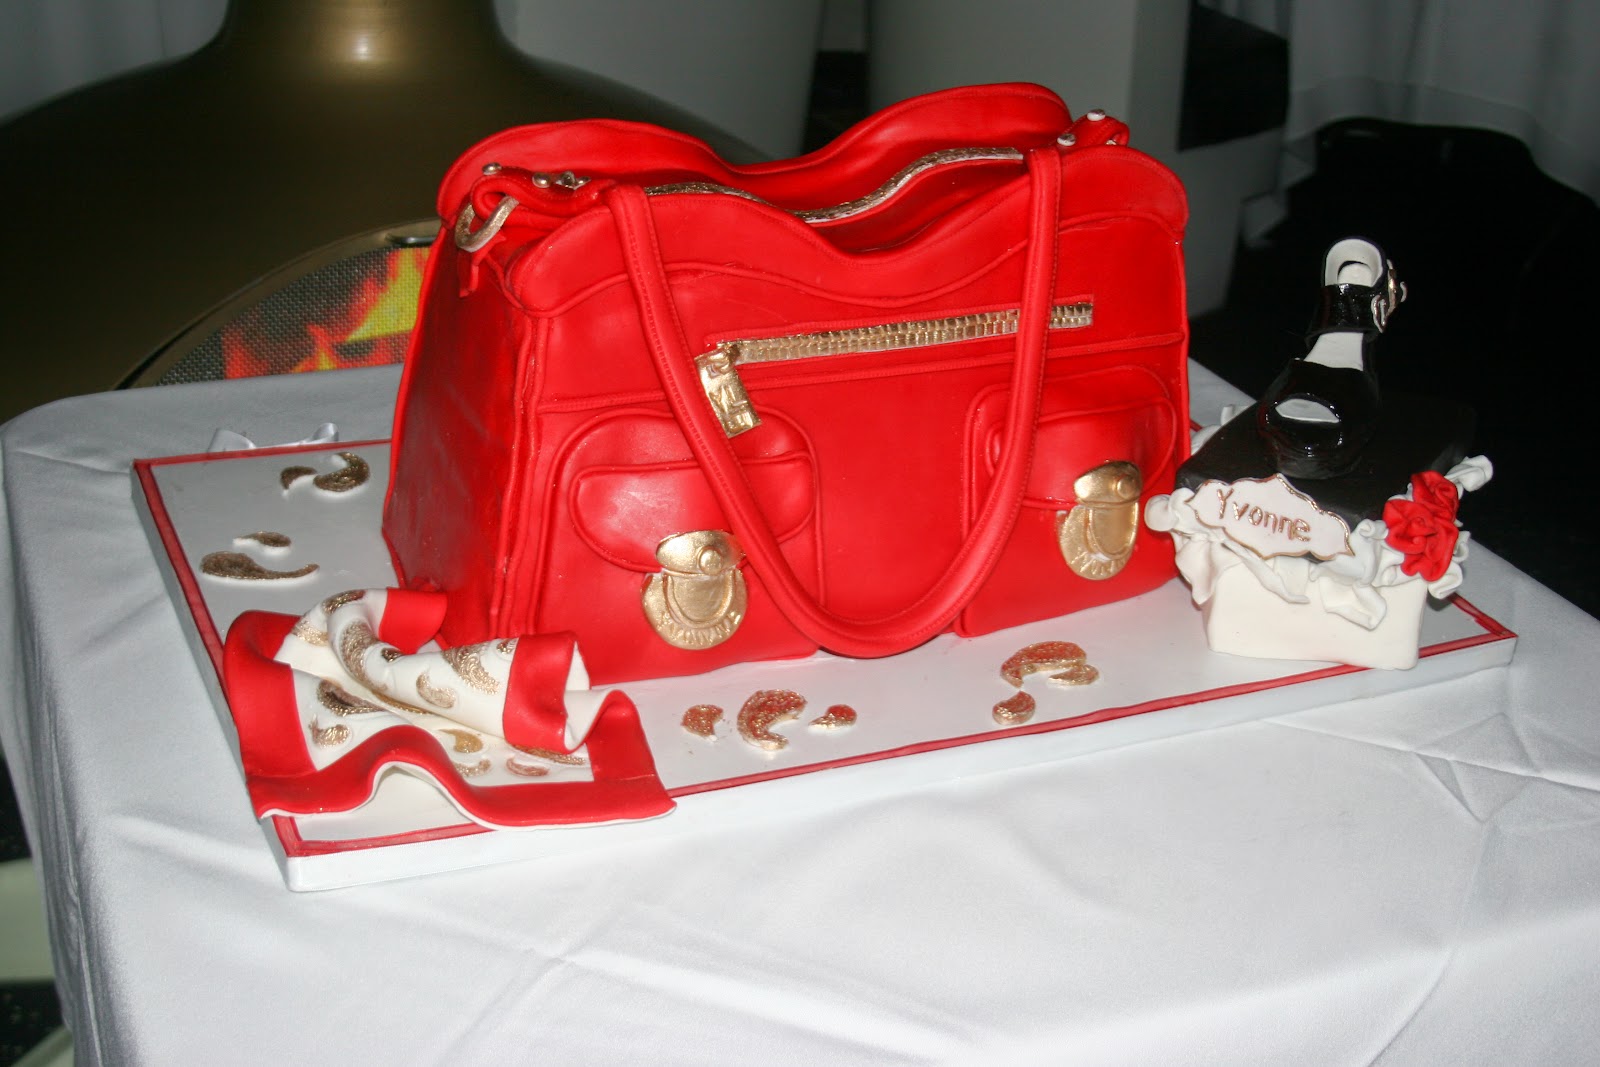 birthday cake forms a beautiful bag